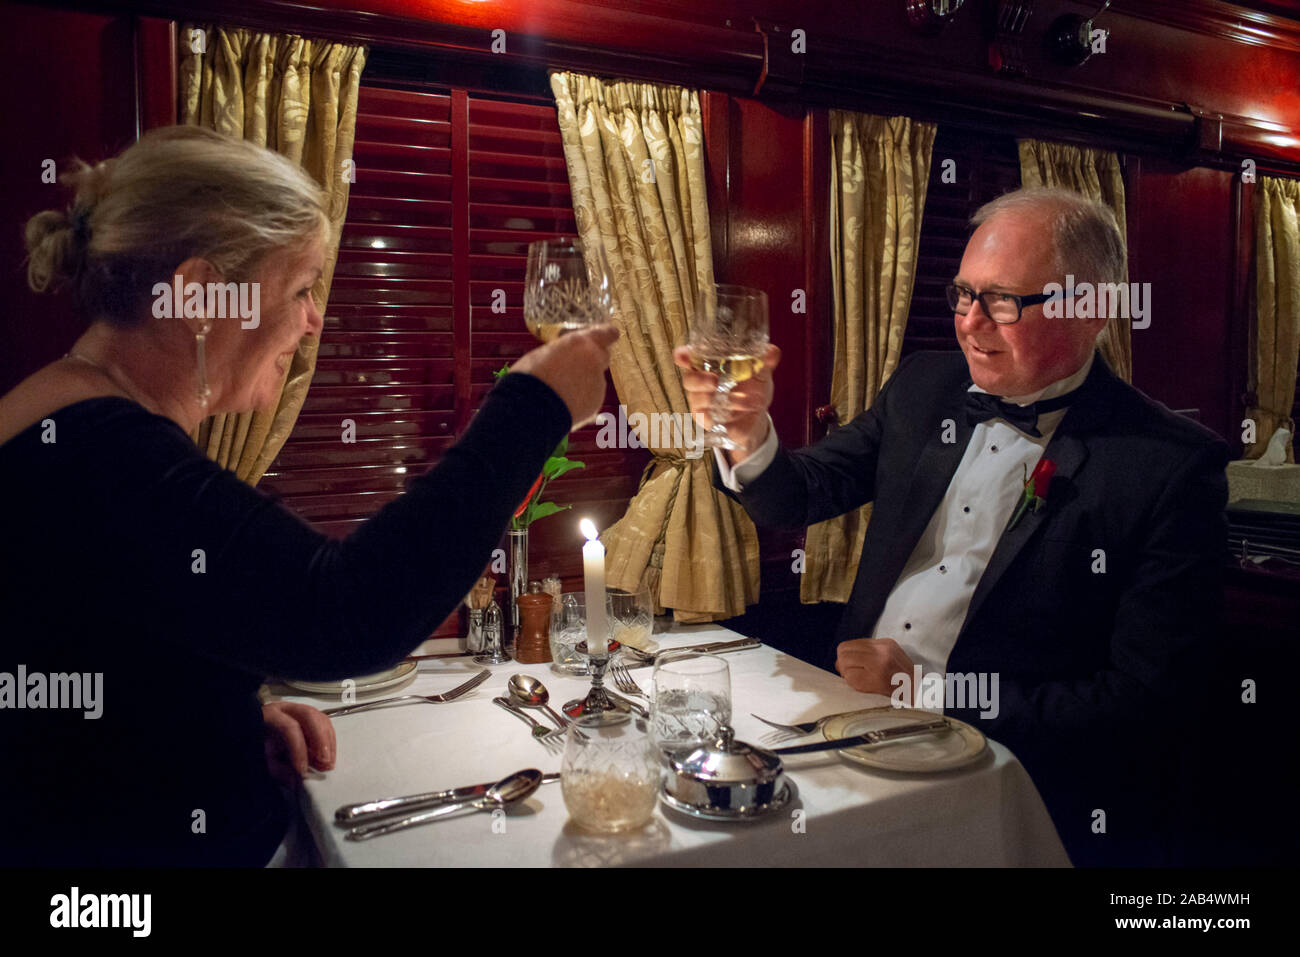 Passengers having dinner in the restaurant car of the The Rovos Rail luxury train travelling between Cape Town and Pretoria in South Africa  Pride of Stock Photo